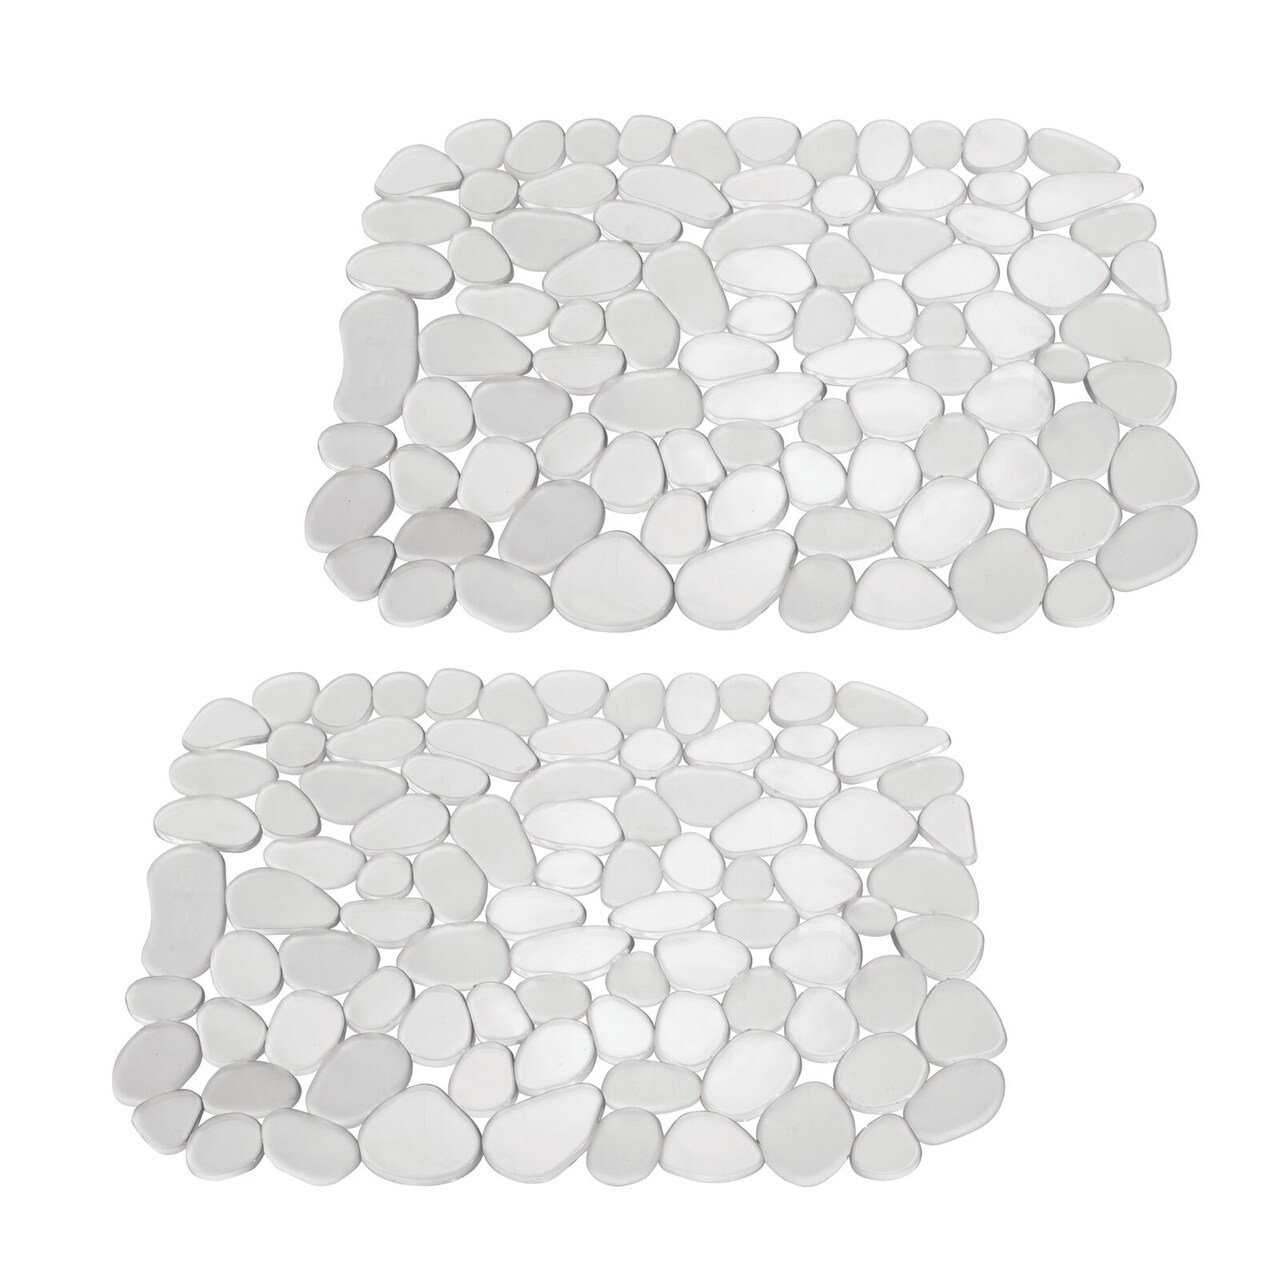 mDesign Kitchen Sink Protector Mat - Pebble Design - Small, 2 Pack